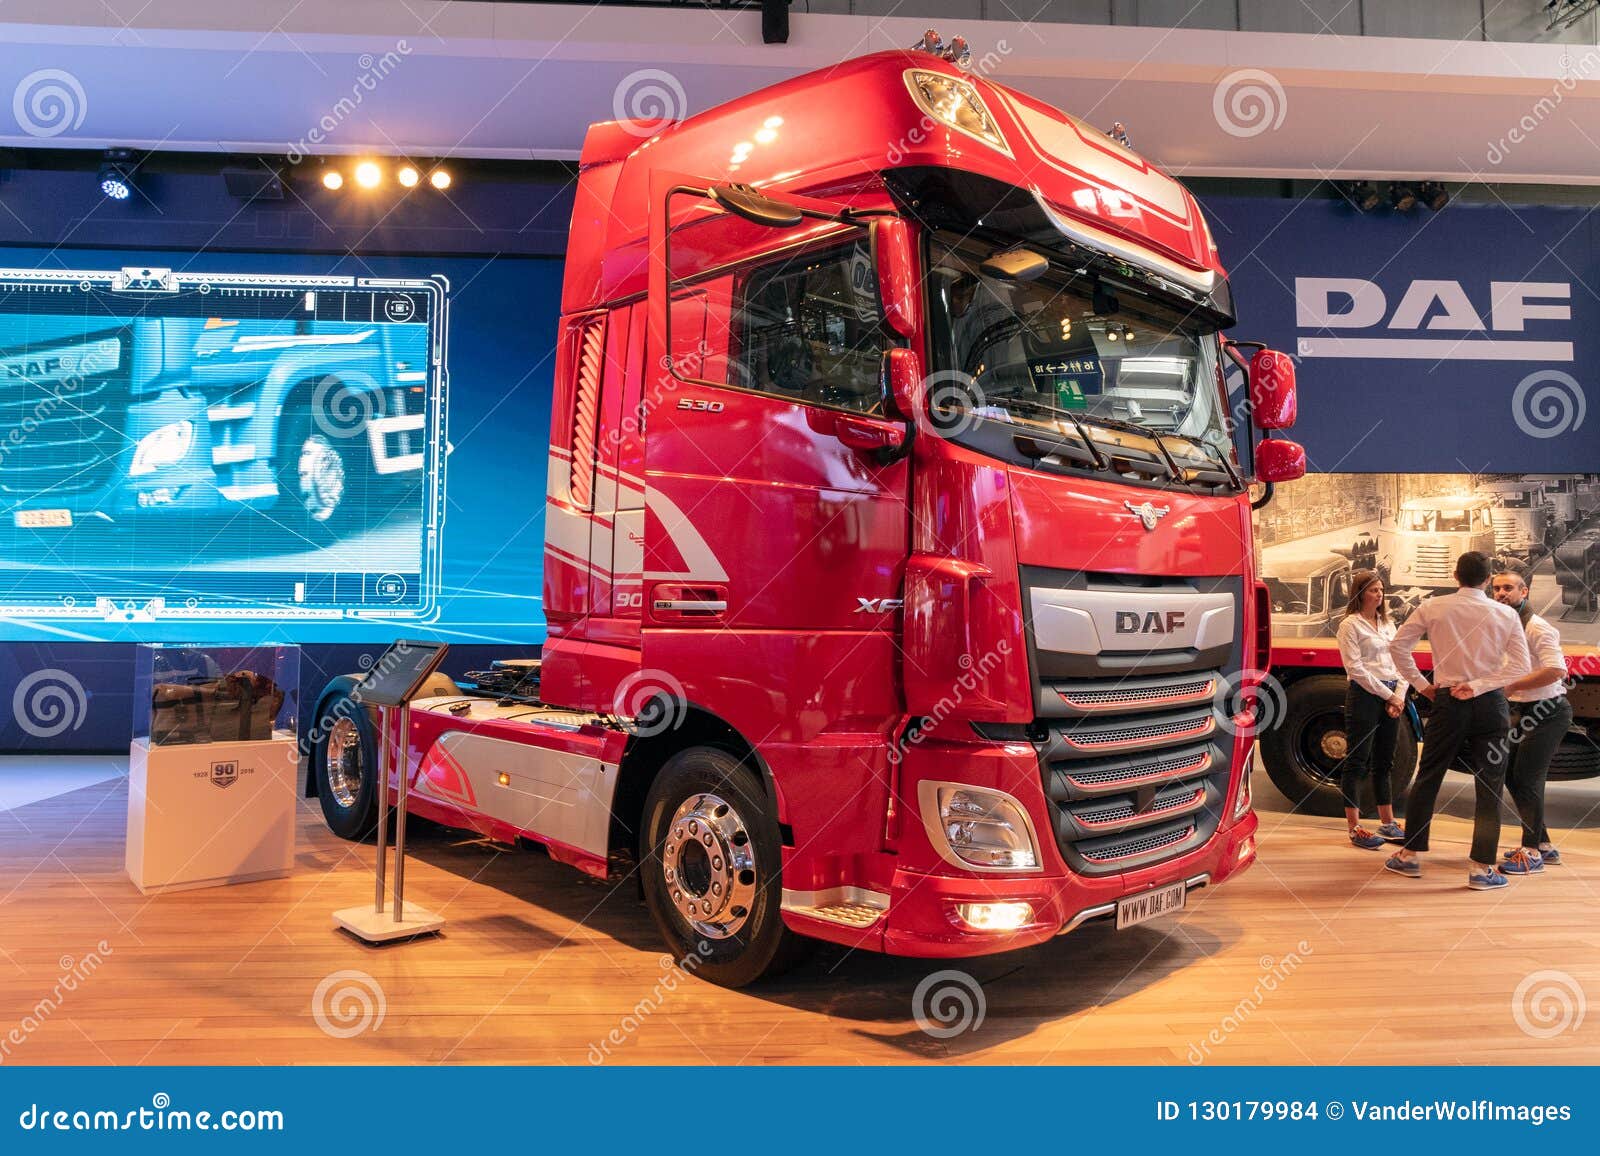 New Daf Xf530 Ft Ssc Tractor Truck Editorial Stock Image